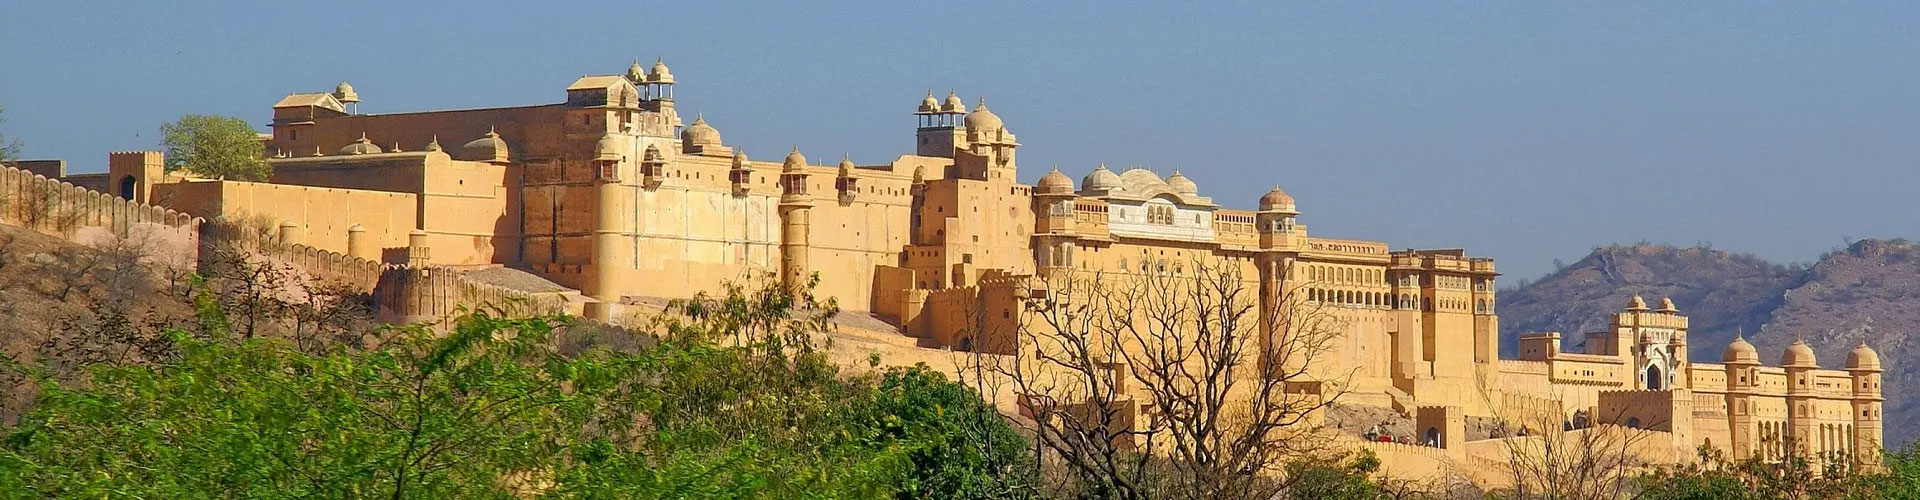 jaipur 2 day tour package